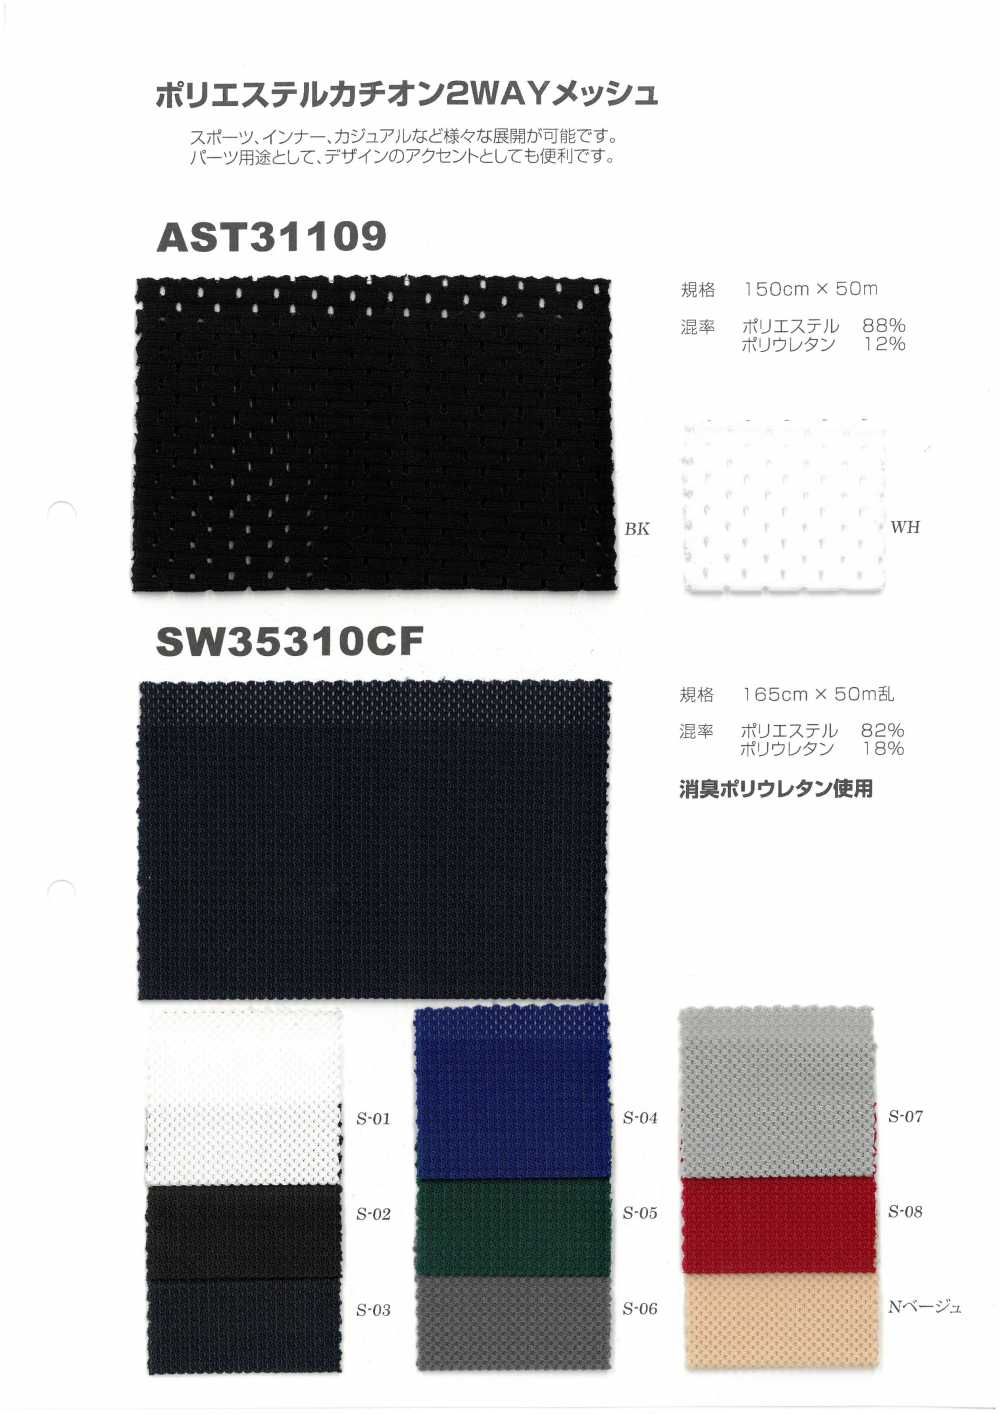 AST31109 Polyester Cation 2WAY Mesh[Textile / Fabric] Japan Stretch